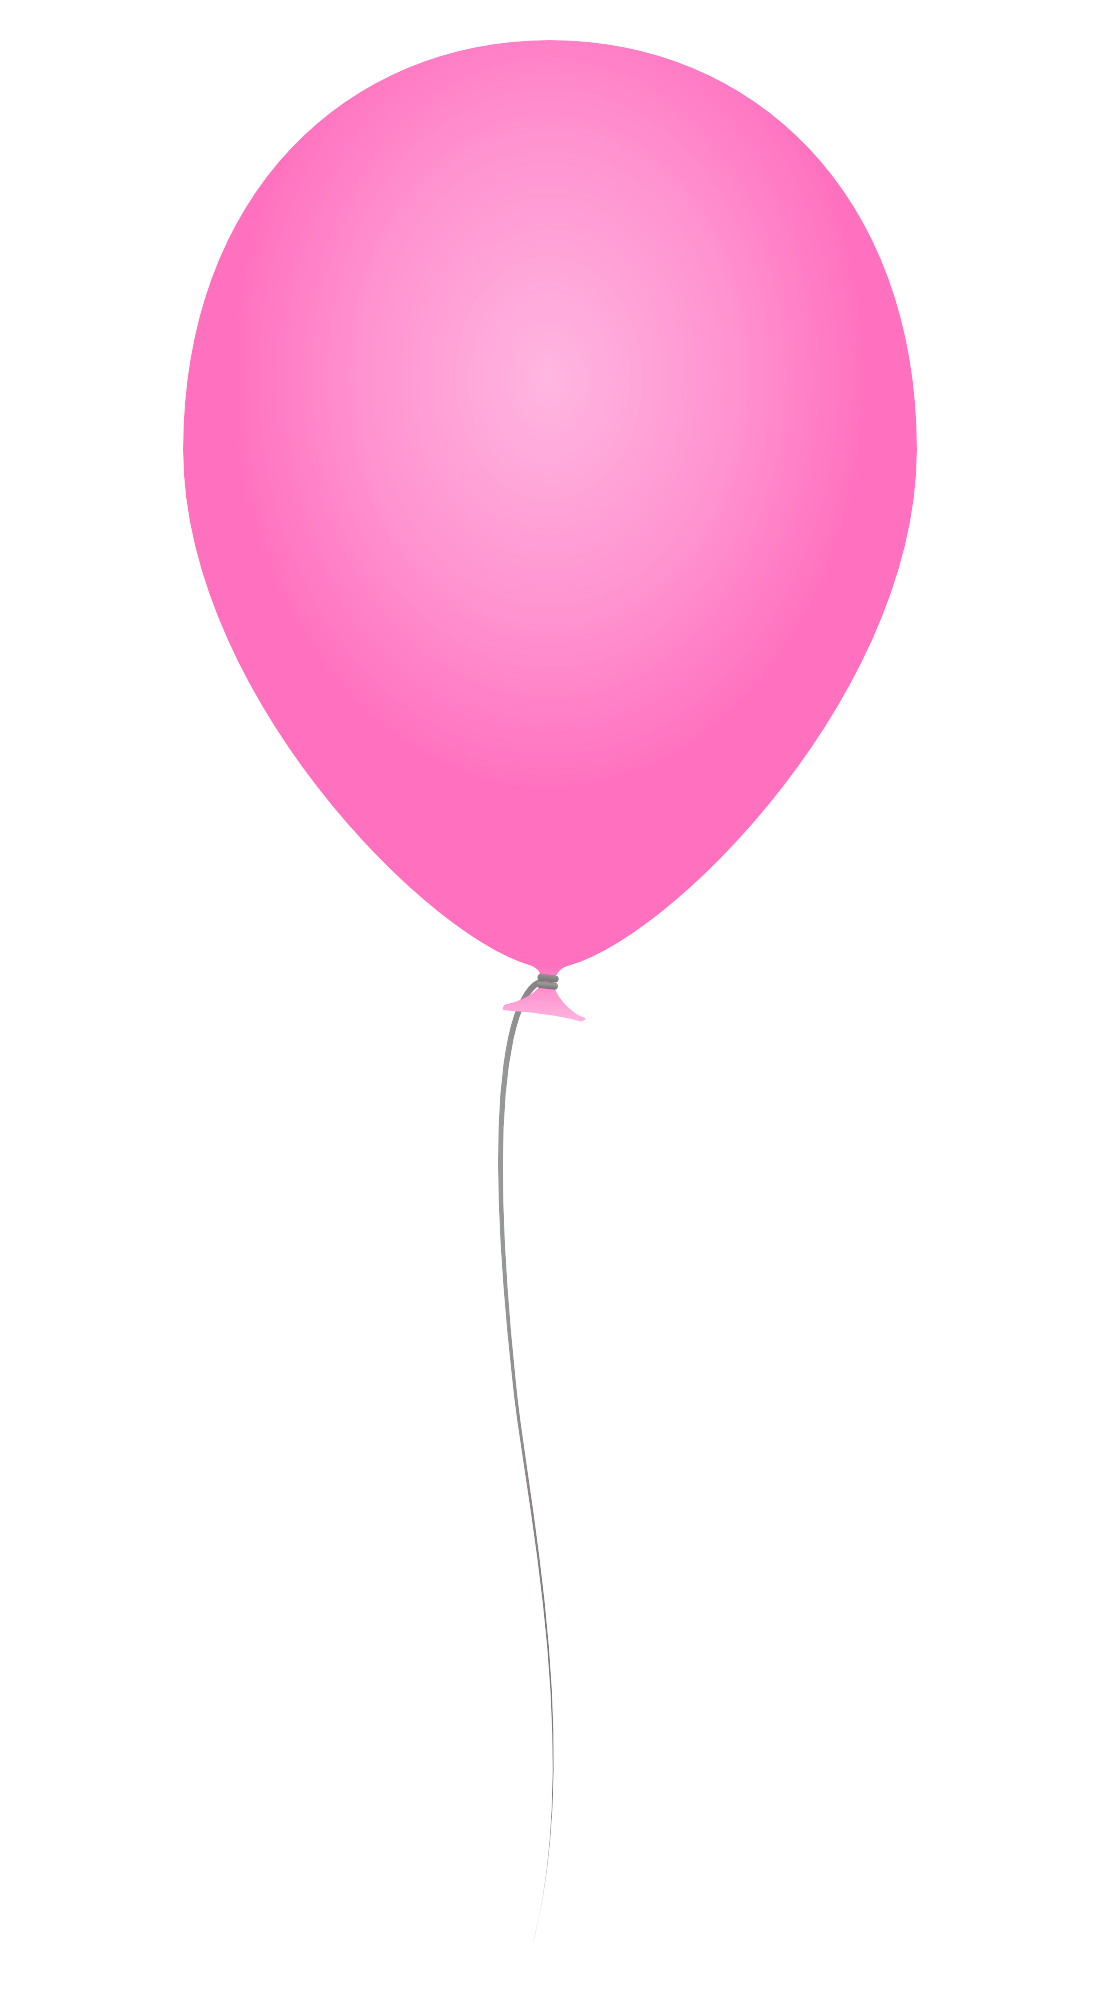 Parachute Balloonist Soccer Pink Plane PNG